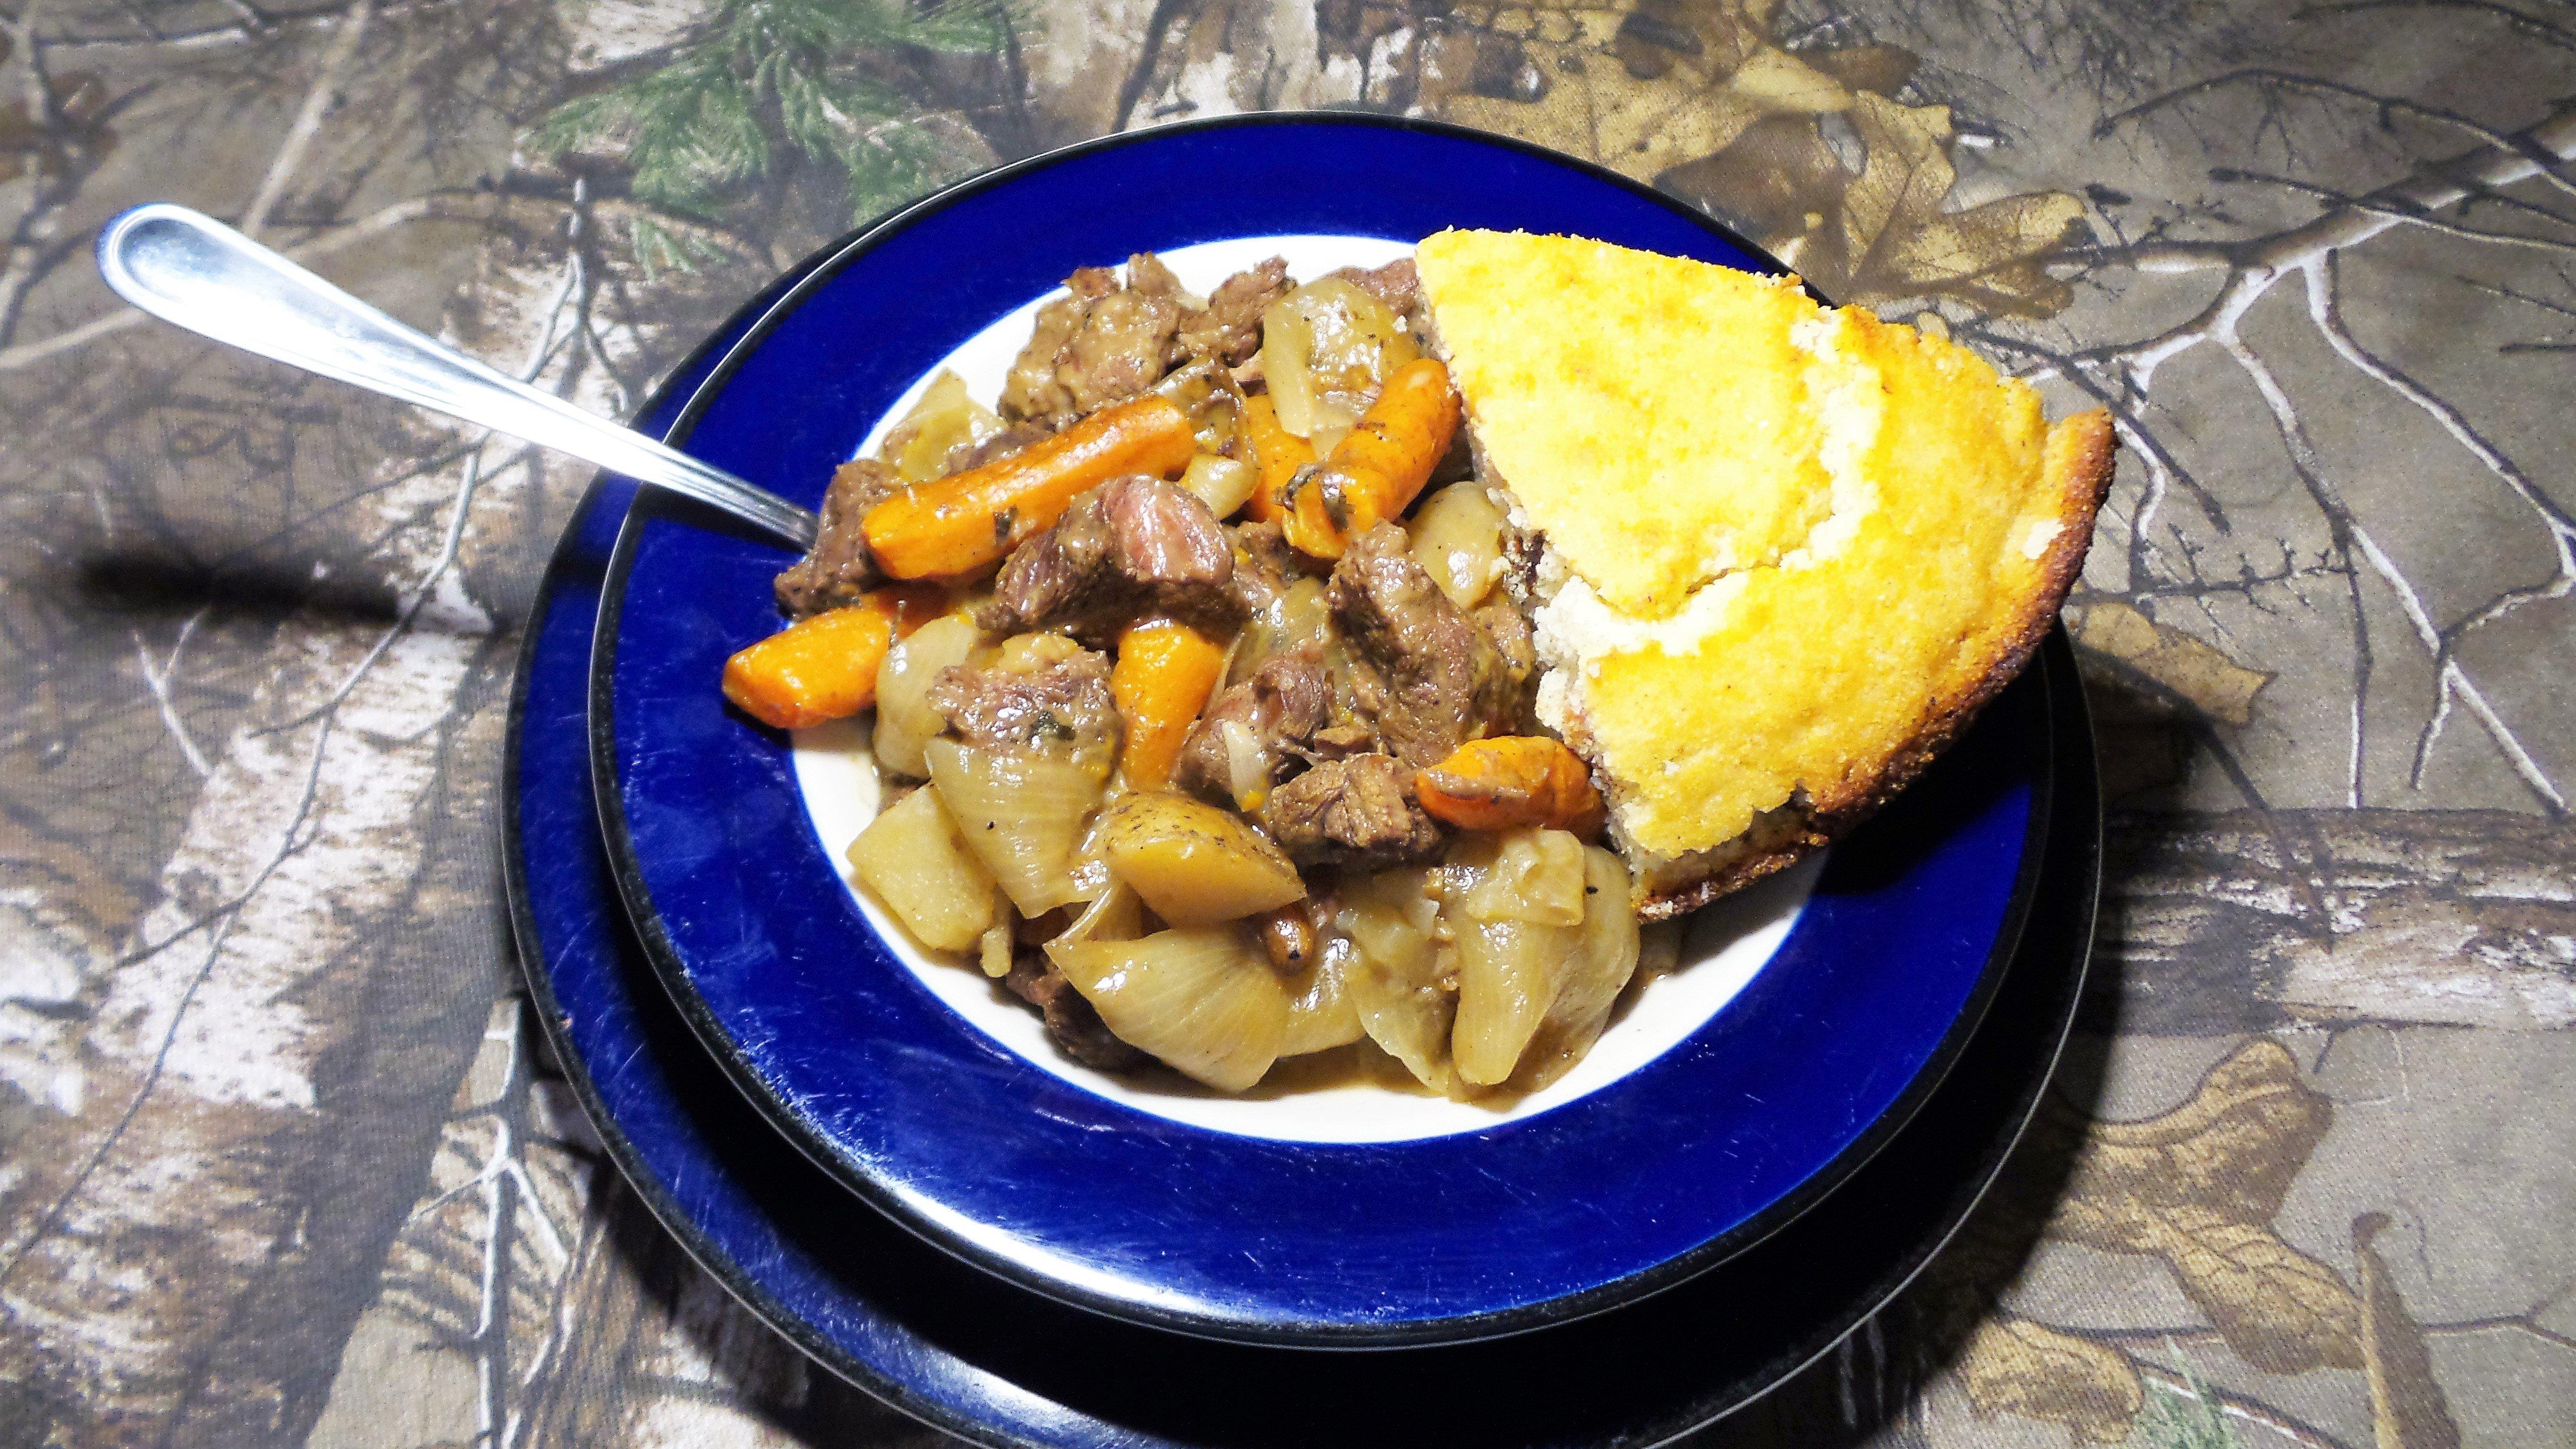 Serve the venison stew with a slice of hot, fresh-from-the-oven cornbread.